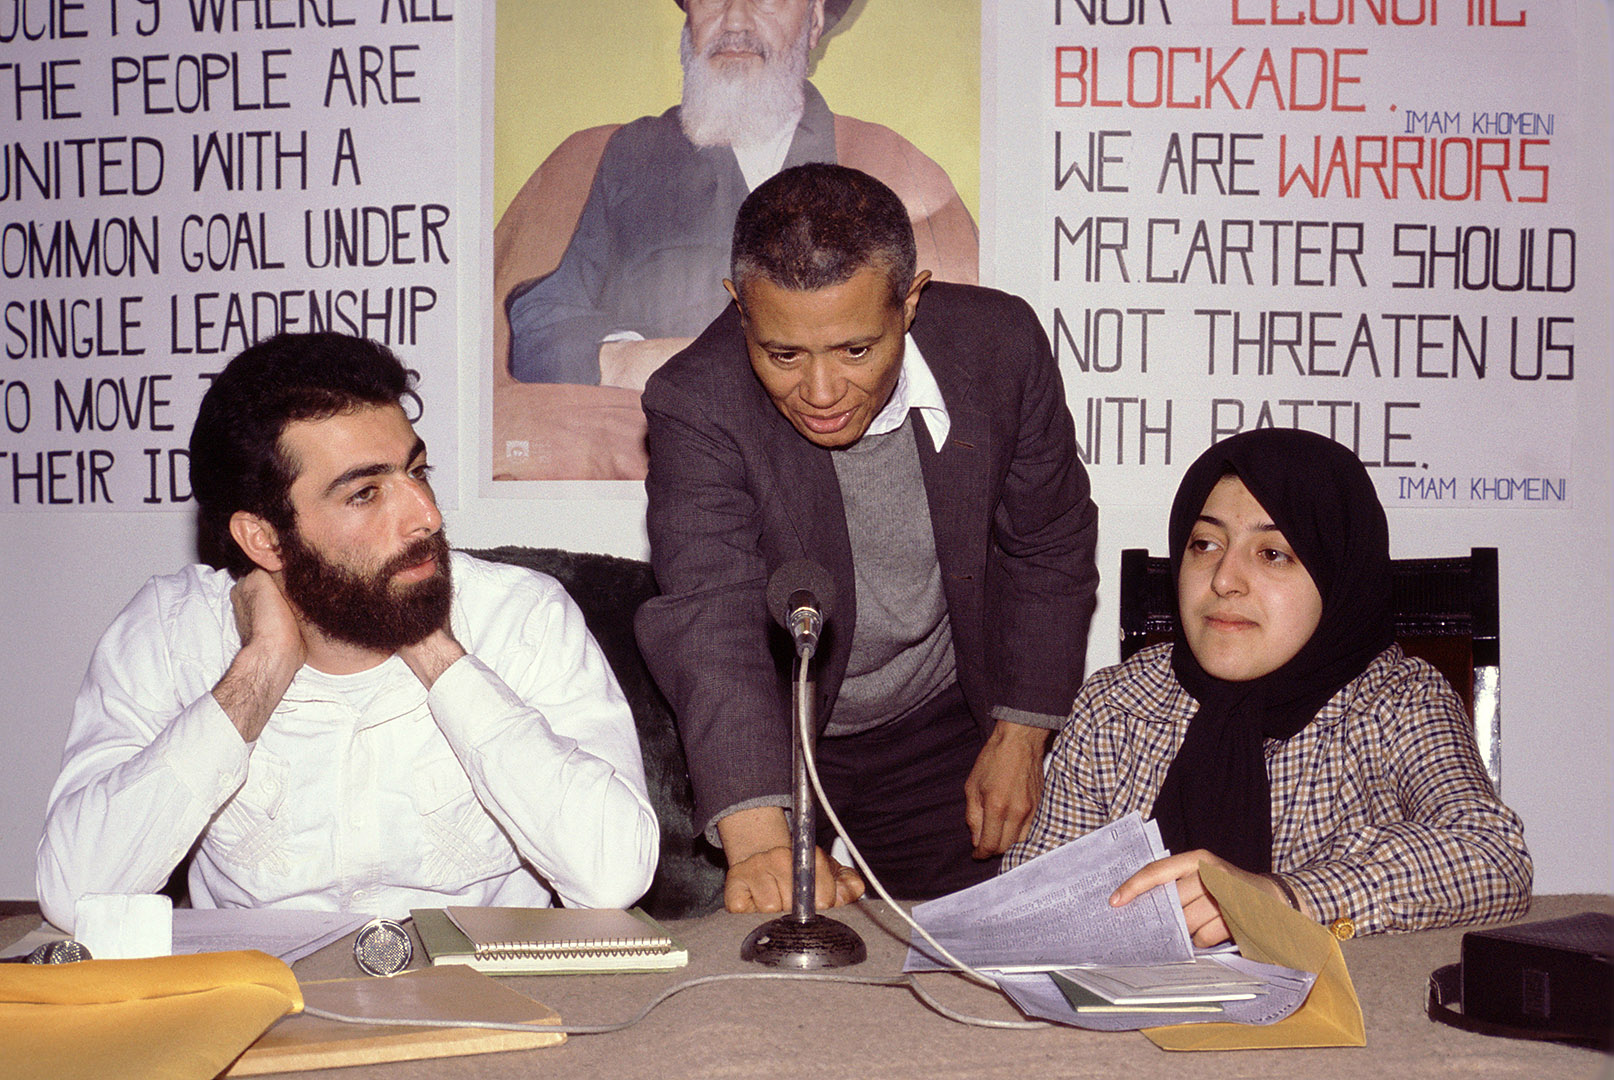 Image likely taken on Feb. 13, 1980 in Tehran, Iran. William Worthy '42 (center) setting up a question-answer session at a Tehran hotel with Hossein Sheikholislam (left) and Massoumeh Ebtekar (right), spokespeople for the students who held 52 U.S. diplomats hostage for 444 days. Ebtekar, often interviewed by U.S. journalists during the crisis, was dubbed "Screaming Mary" by the media. Now a professor of immunology in Tehran, she talked to Matt Lauer of the Today Show last September about the status of women in her country. Sheikholislam, meanwhile, became Iran's deputy foreign minister and ambassador to Syria. In February 2008 he received the Louis M. Lyons Award for Conscience and Integrity in Journalism from Harvard's Nieman Foundation for Journalism.